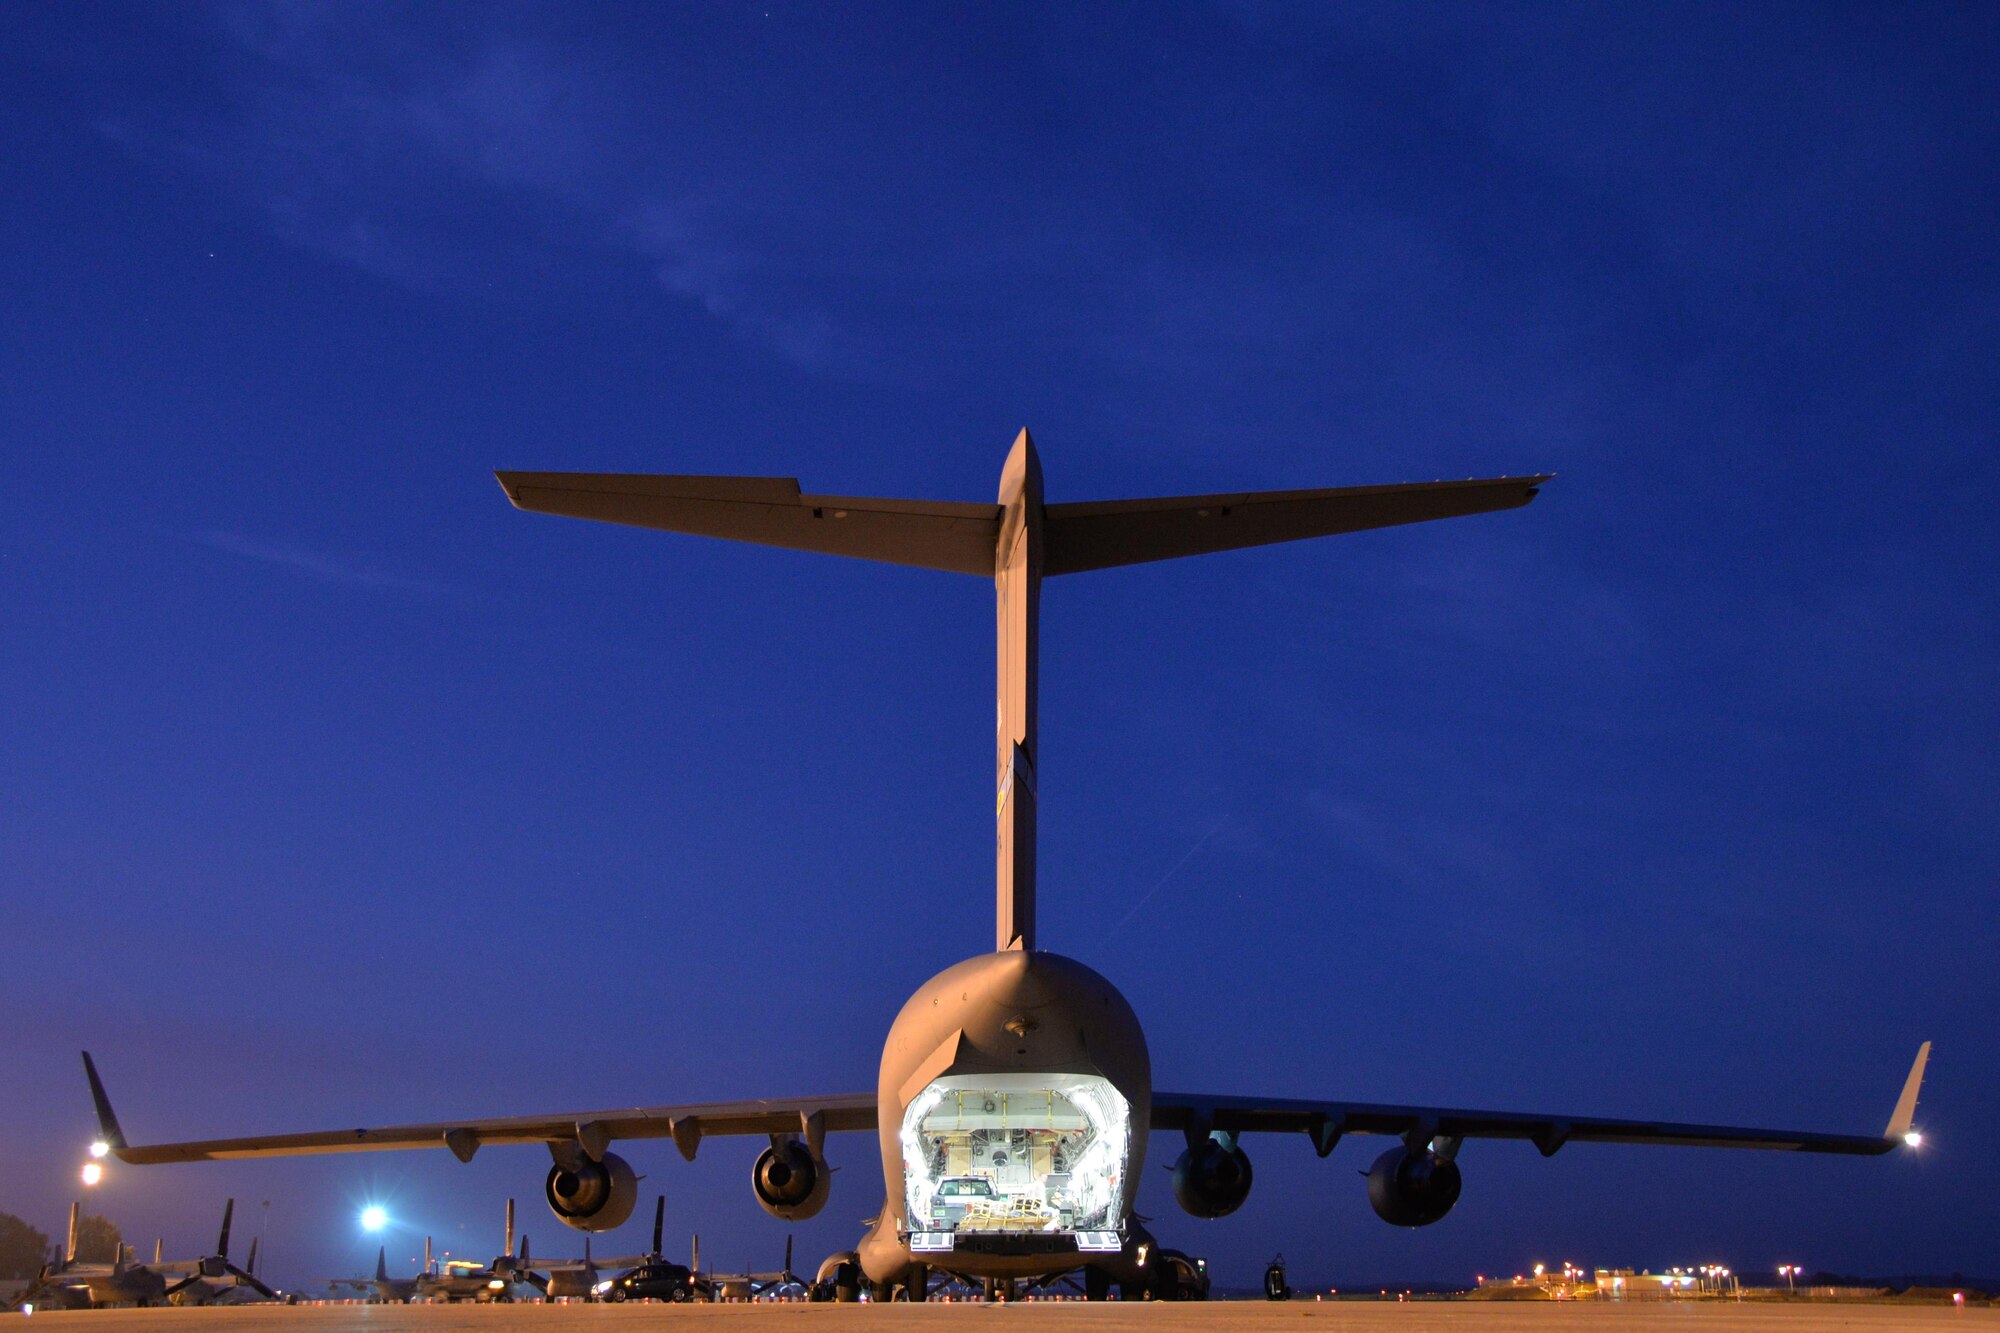 A C-17 Globemaster III lowers its cargo ramp while waiting to be unloaded at Morón Air Base, Spain, Feb. 24, 2016. The cargo was flown to Spain in preparation for Exercise Cold Response 16, a biennial NATO exercise involving nearly 16,000 troops from a dozen allied and partner nations. (U.S. Air Force photo/Senior Airman Joseph Raatz) 